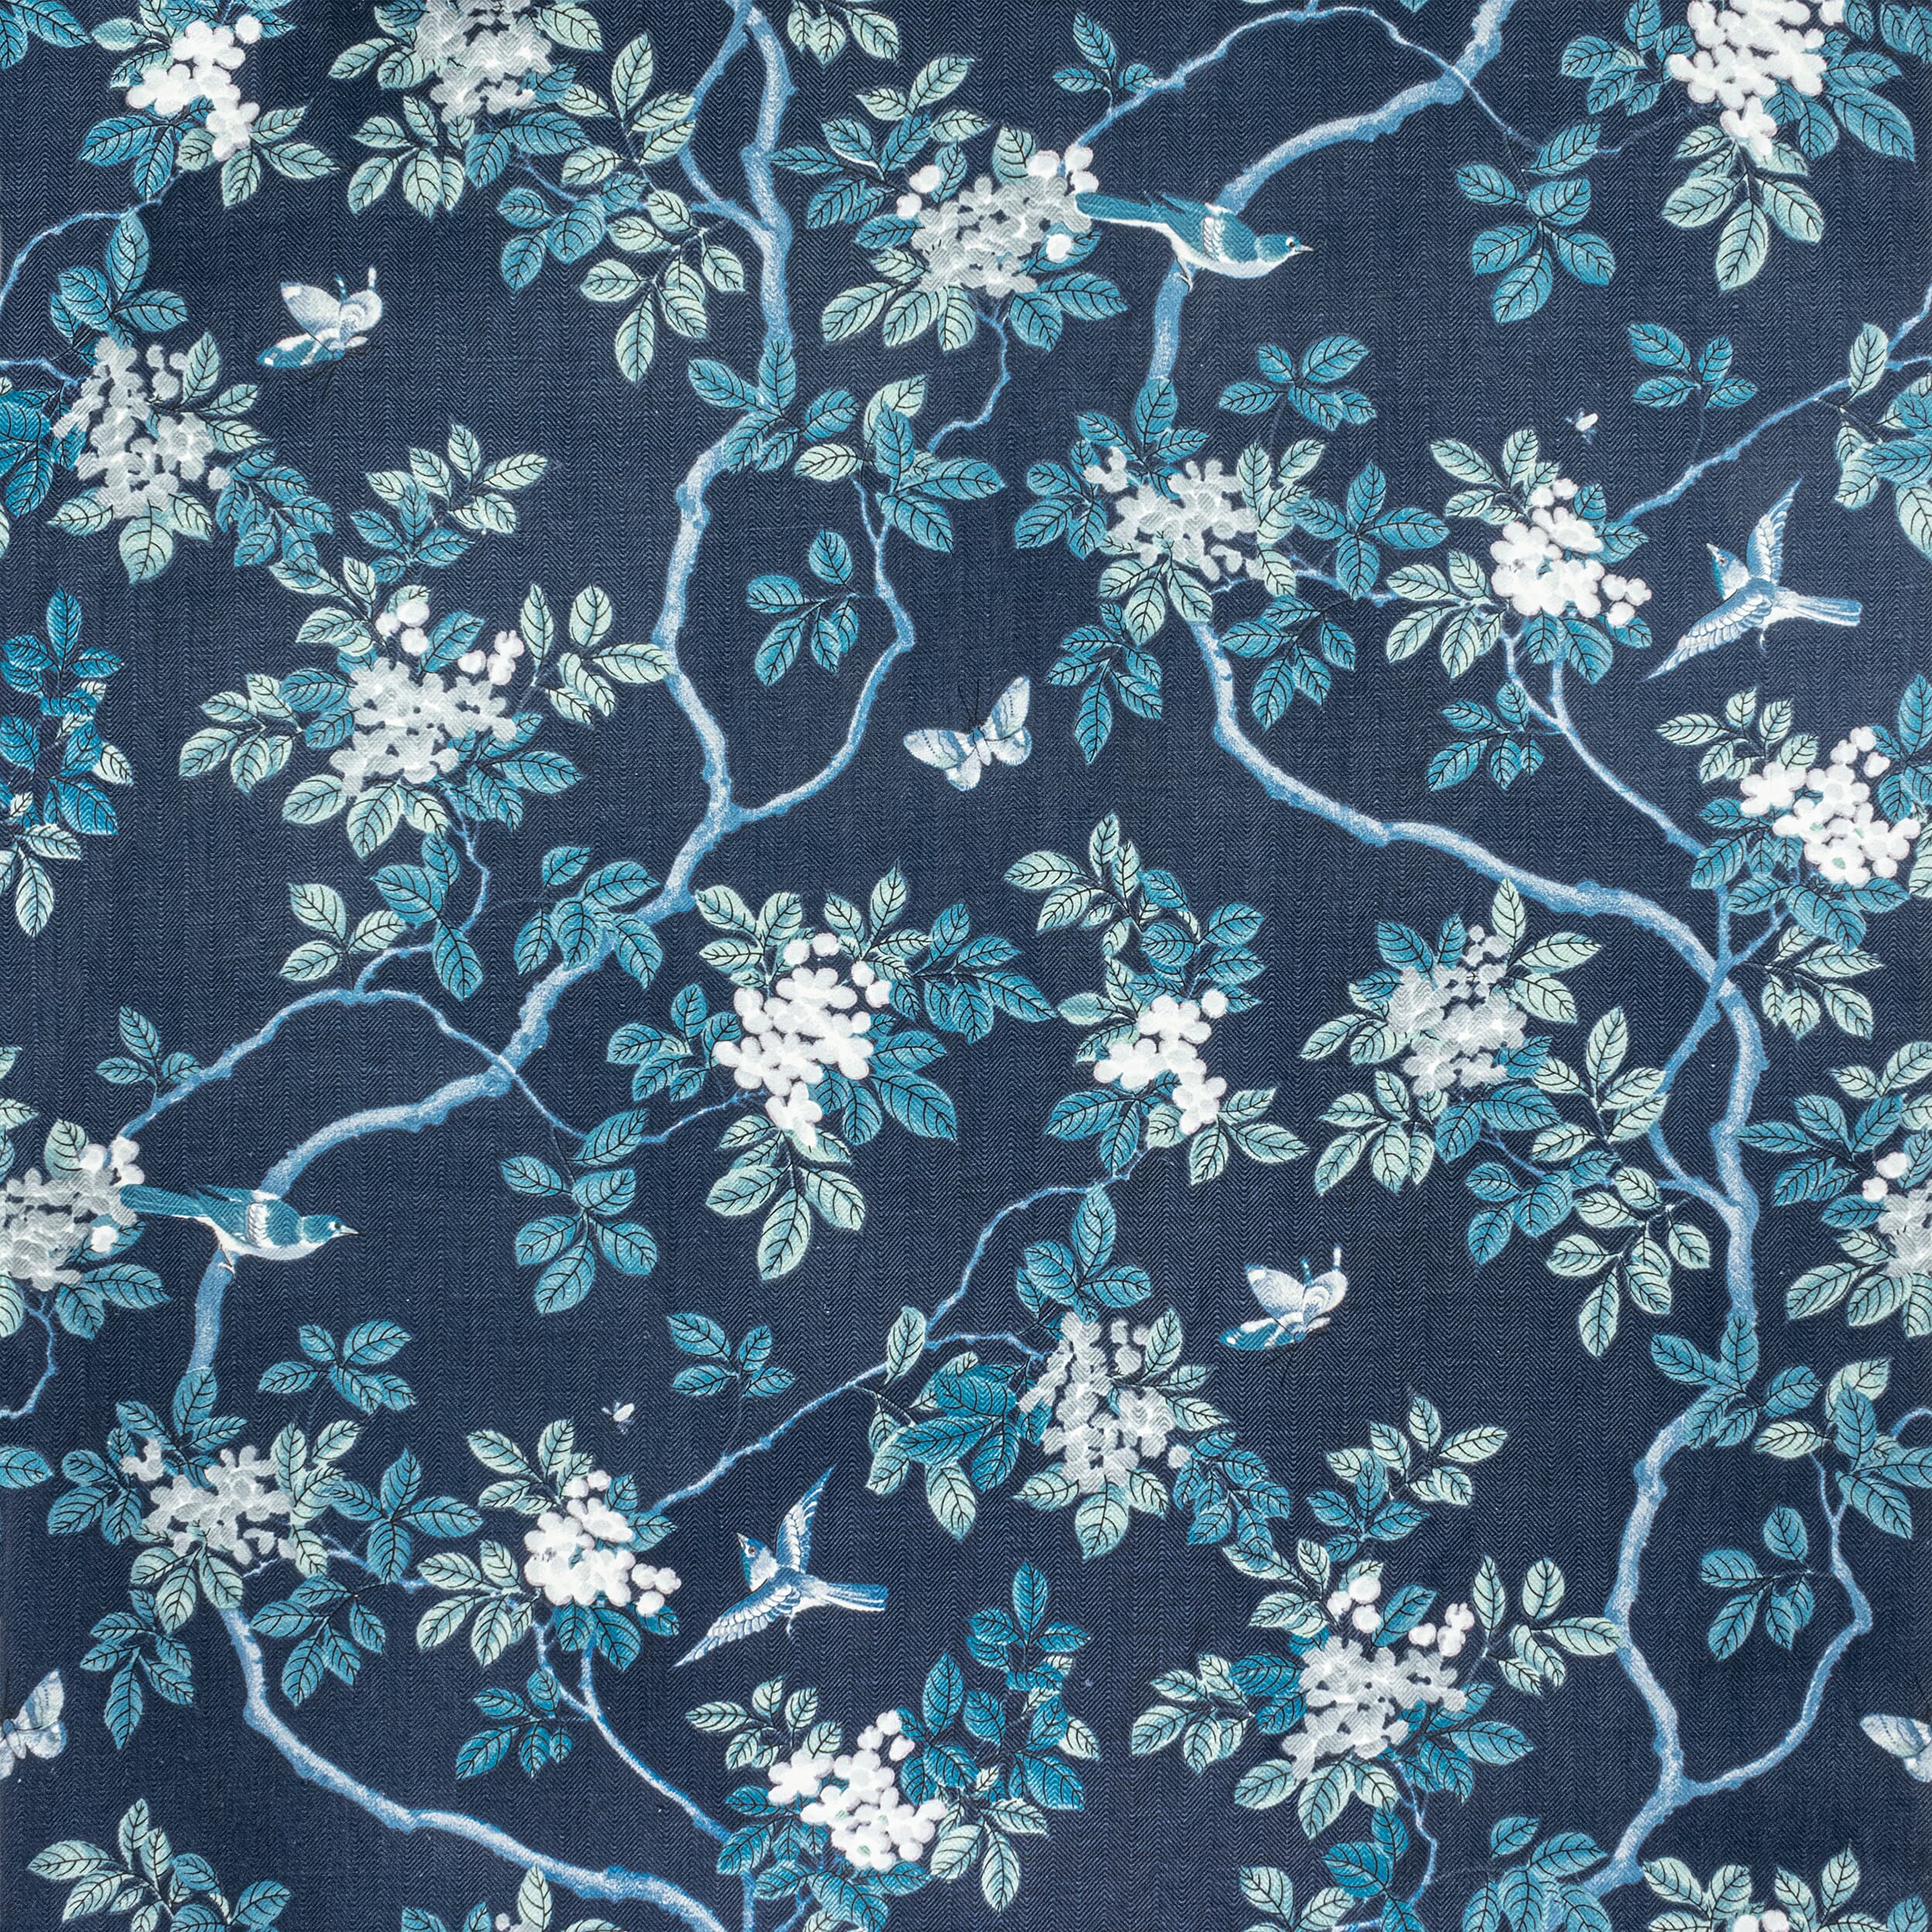 7814-44 Birds And Butterfly Herringbone Riptide by Stout Fabric